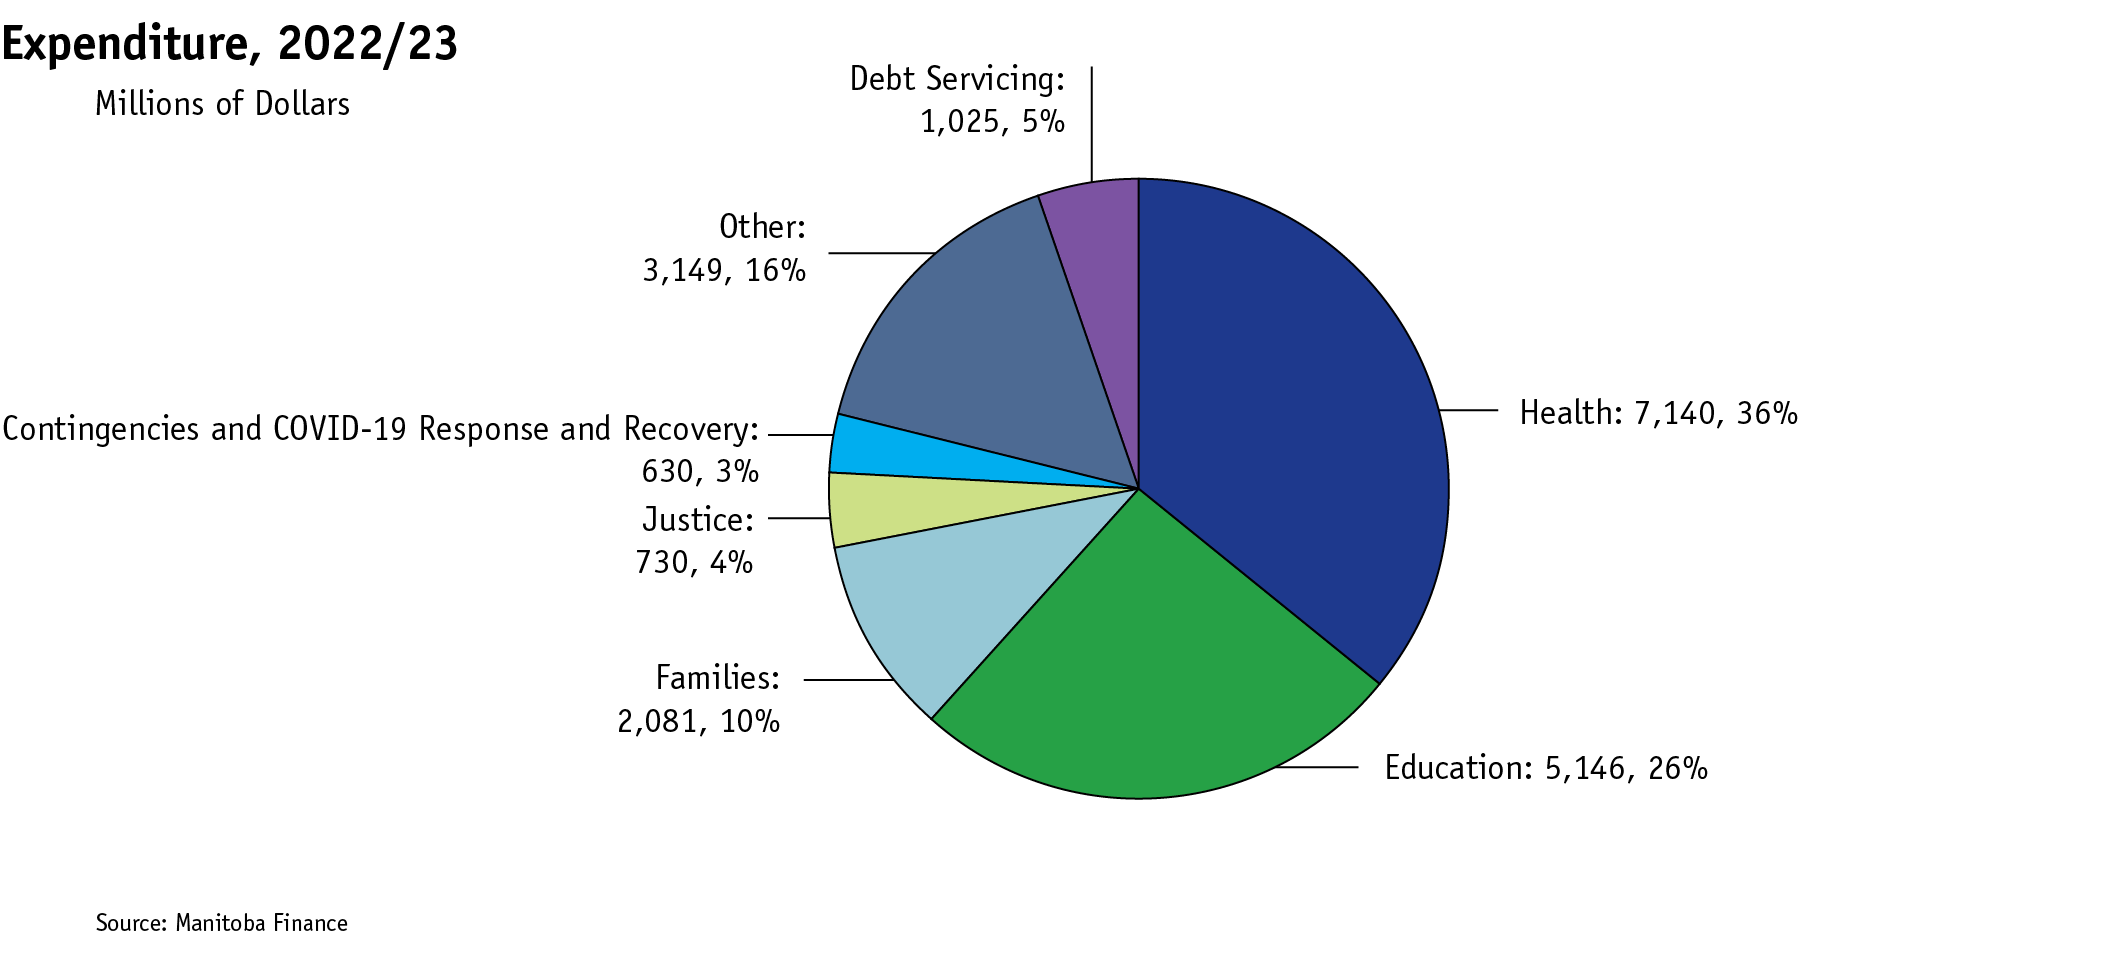 pie chart showing the expenditure budget by category for 2022/23